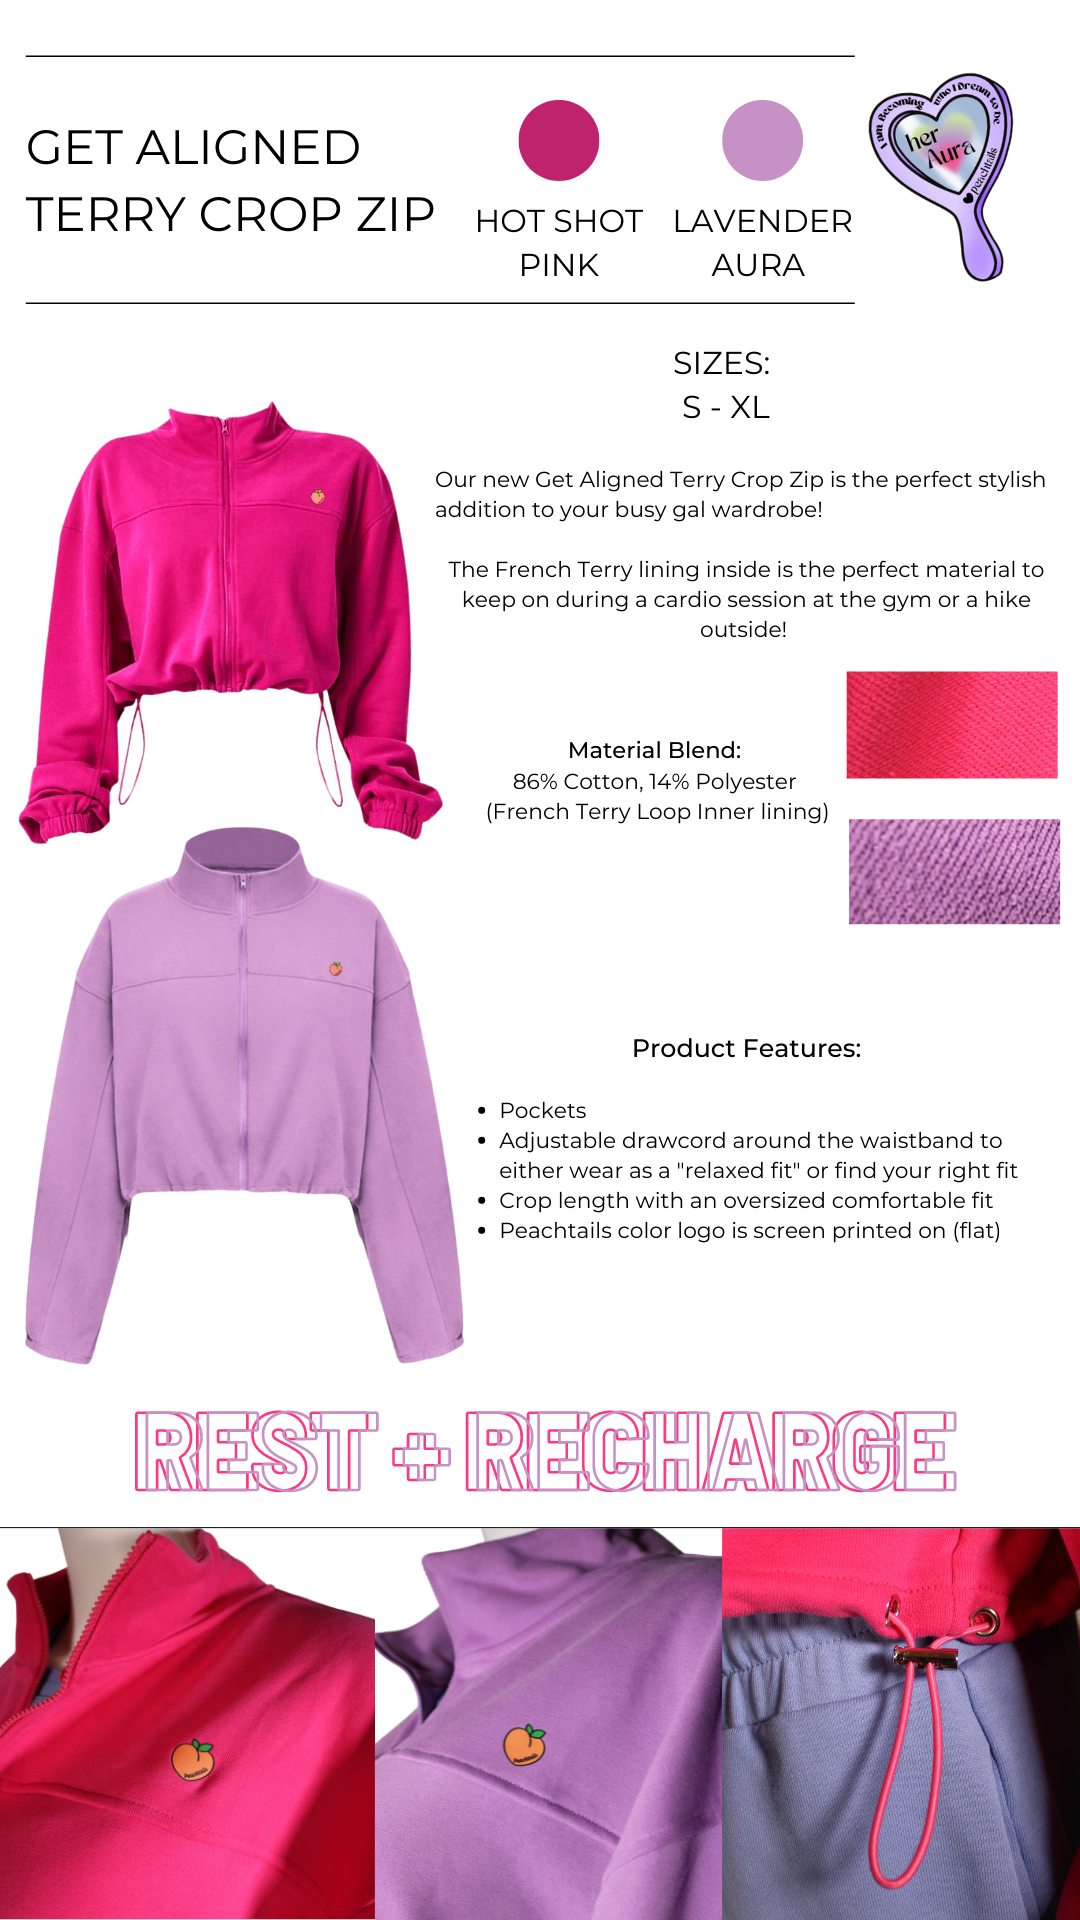 The image is an advertisement for a "Get Aligned Terry Crop Zip" jacket available in hot shot pink and lavender aura colors, in sizes S - XL. It features a material blend of 84% Cotton, 16% Polyester with French Terry loop inner lining. Product features include pockets, adjustable drawcord at the waistband, crop length, and a Peachtails color logo screen printed on the left chest. Images of the jacket in both colors are displayed.